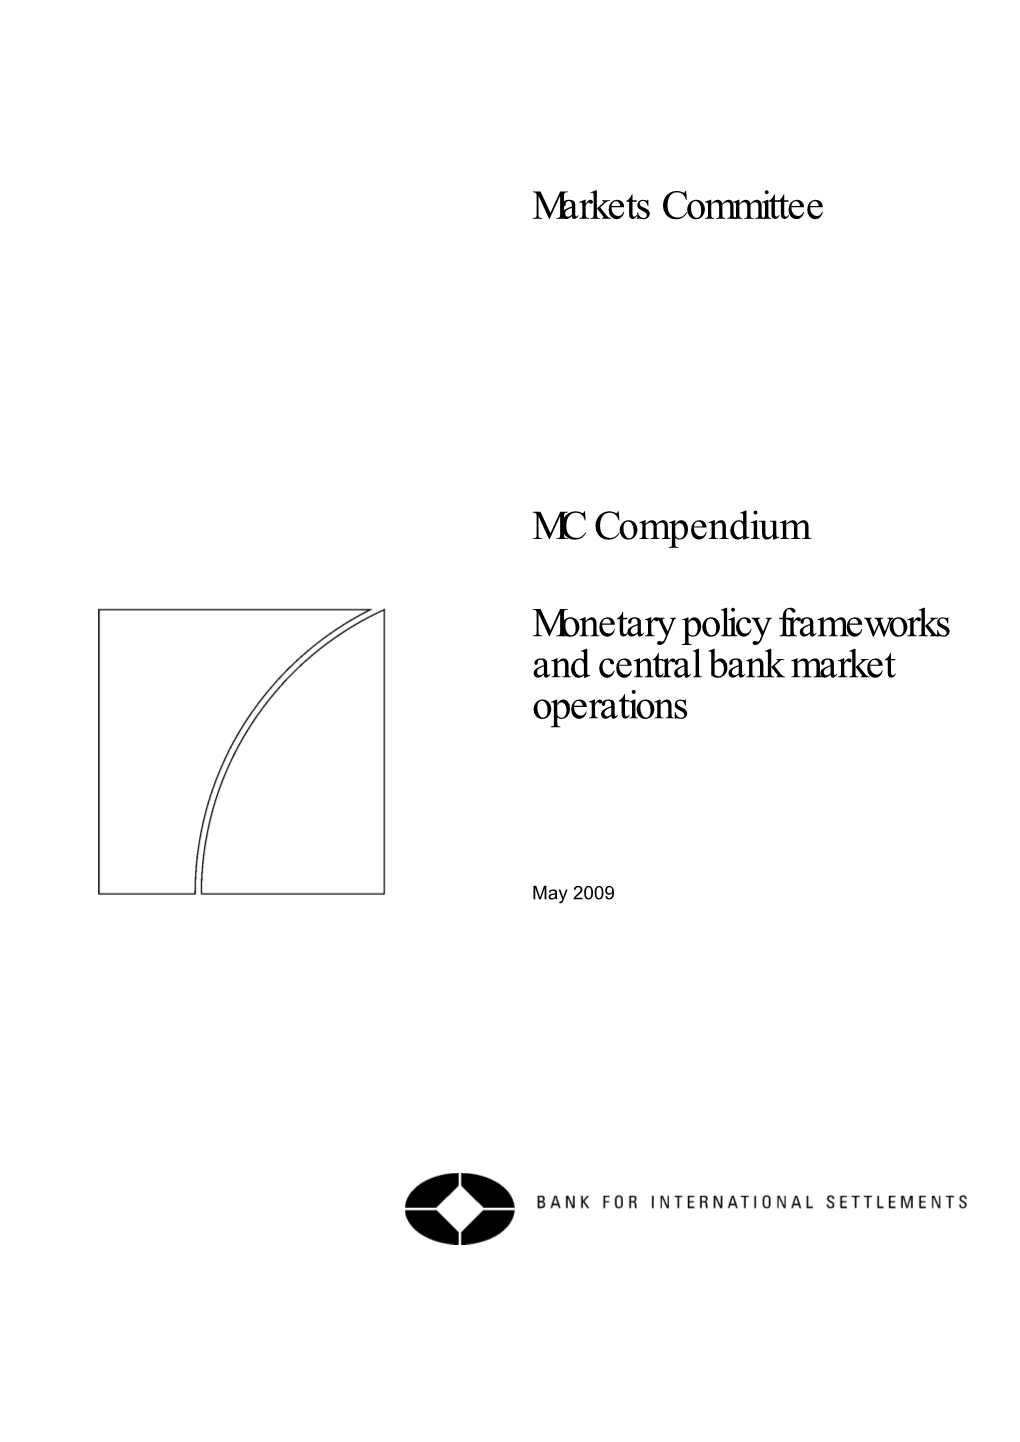 Monetary Policy Frameworks and Central Bank Market Operations